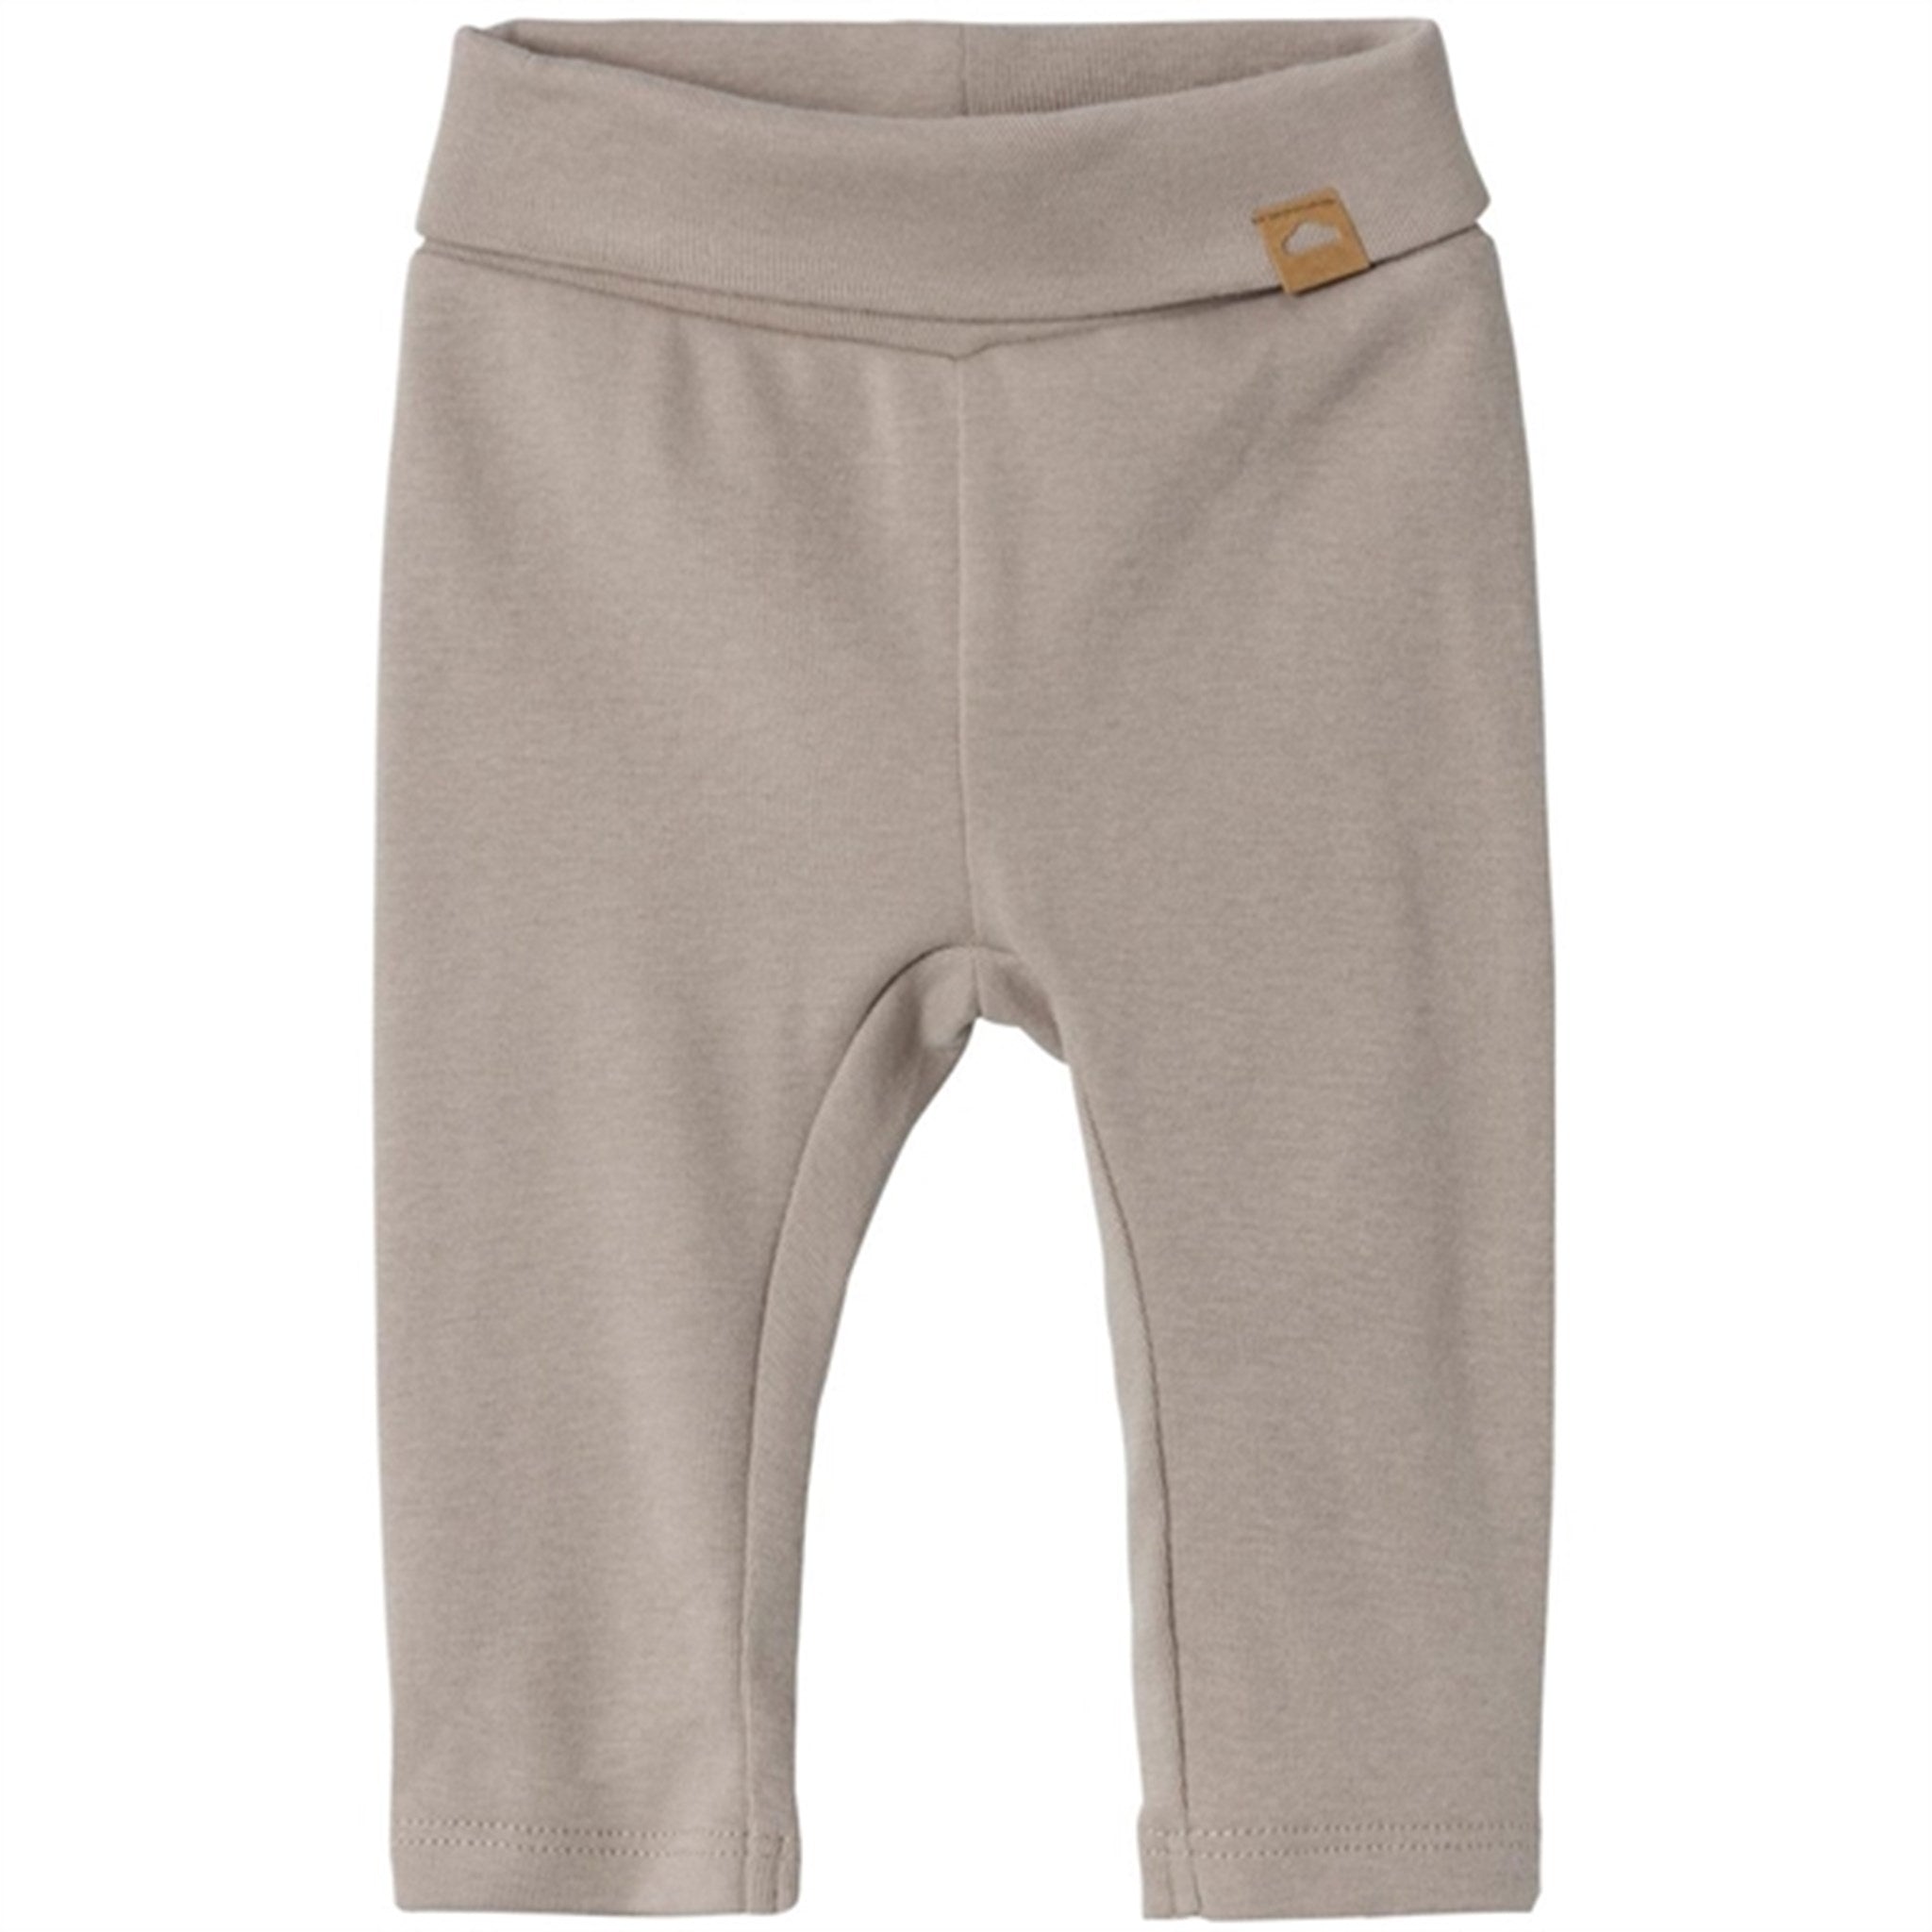 Name it Pure Cashmere Ohoney Long Johns